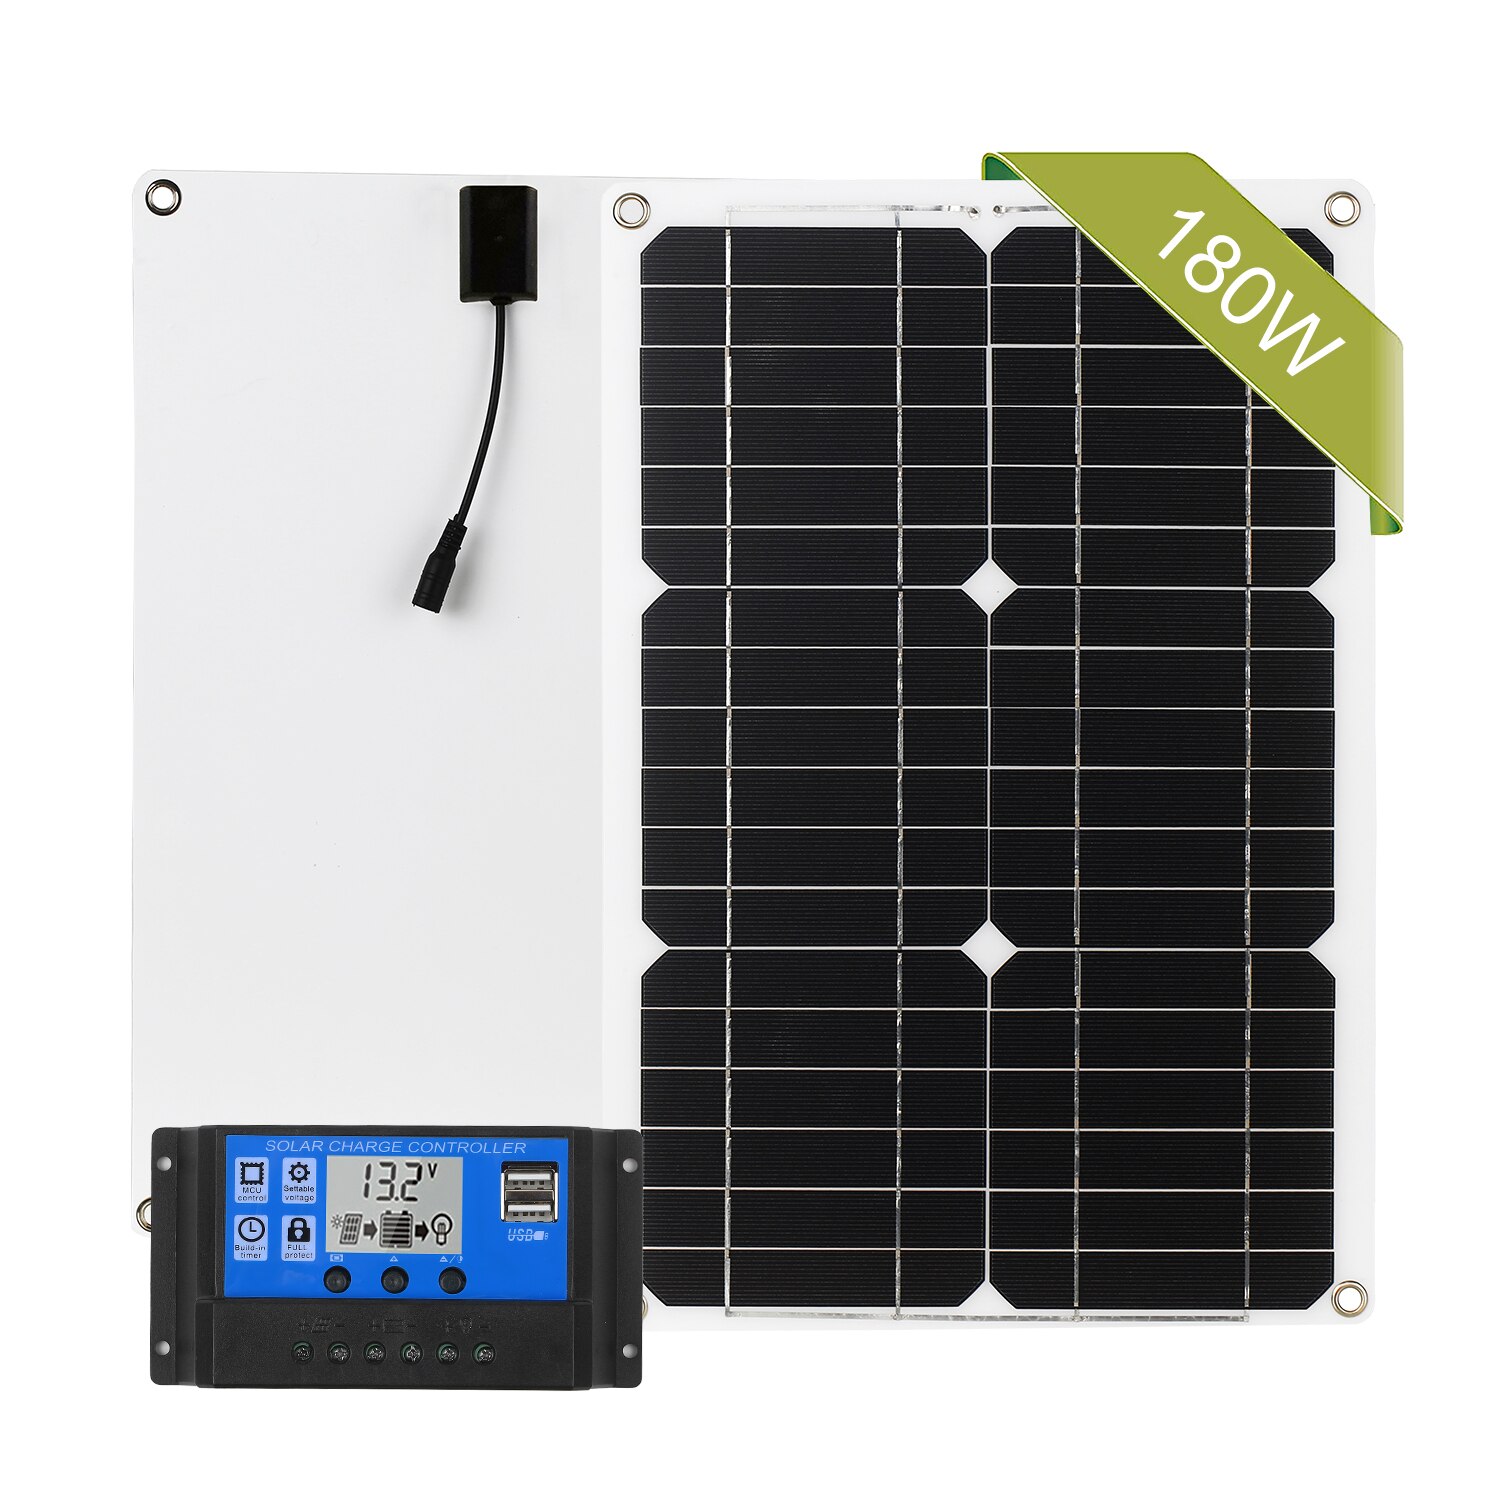 180W 12V Solar Panel Kit Off Grid Monocrystalline Module with Solar Charge Controller SAE Connection Cable Kits Solar Power: With Controller